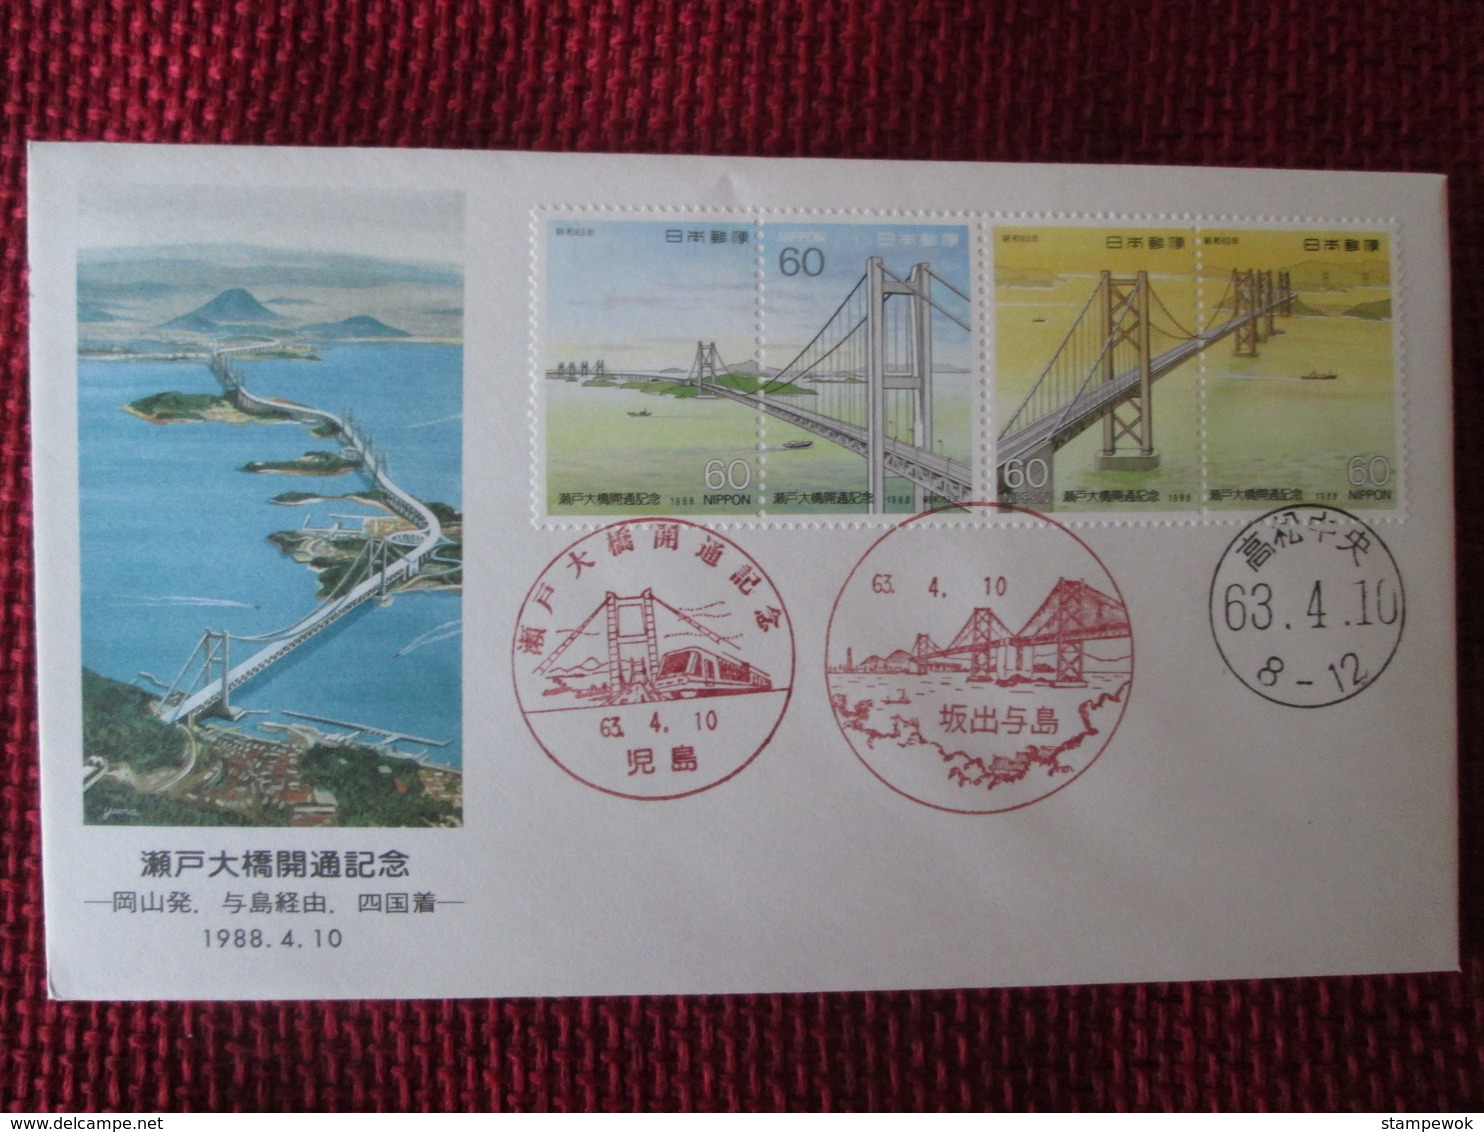 1988 Japan - Opening Of The Great Seto Bridge (Seto Ohashi) - Ceremonial Cover Postmarked First Day Of Traffic Use 10/4 - Bridges